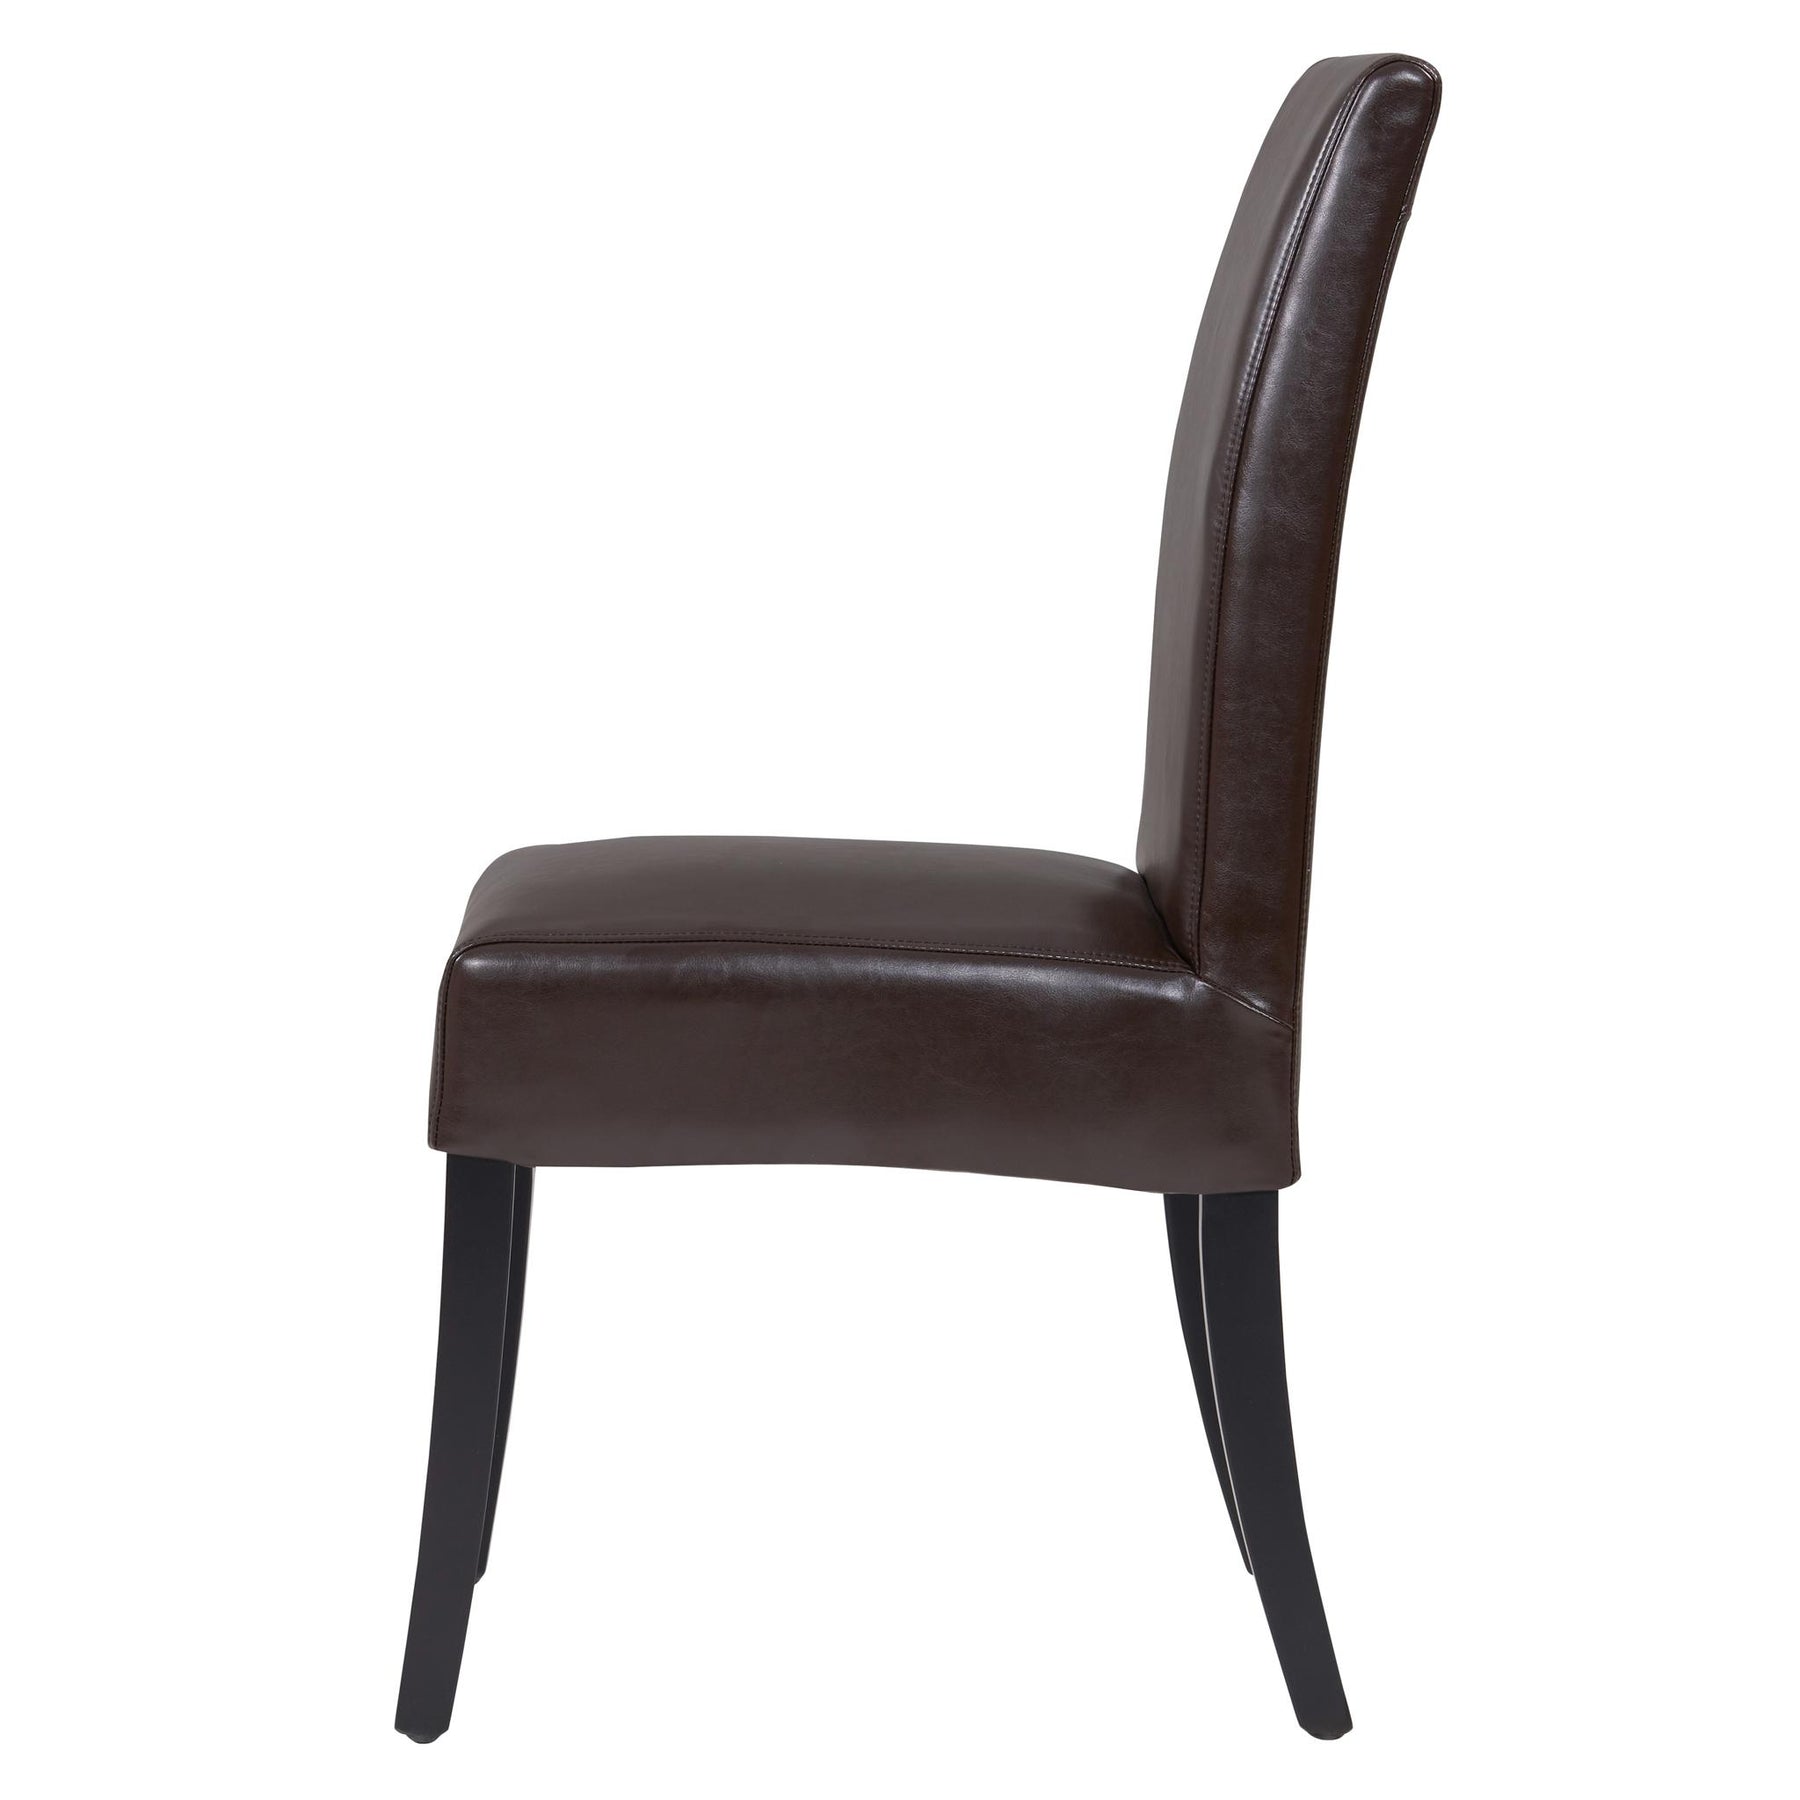 Valencia Bicast Leather Chair (Set of 2) by New Pacific Direct - 108239